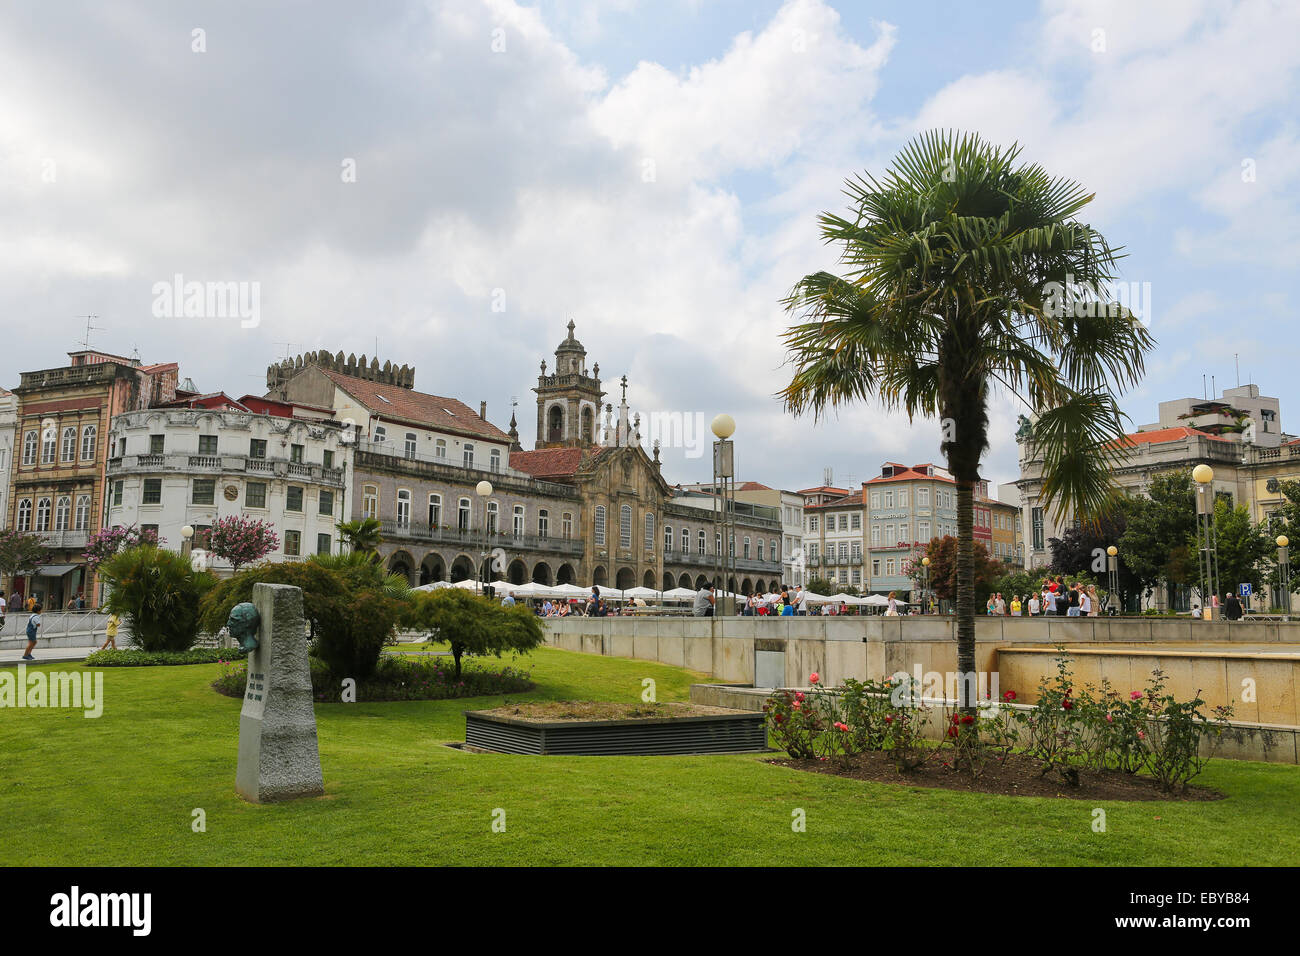 BRAGA, PORTUGAL - AUGUST 9, 2014:  Remnants of the Castle of Braga, the Keep Tower,  and other historic buildings at the Avenida Stock Photo